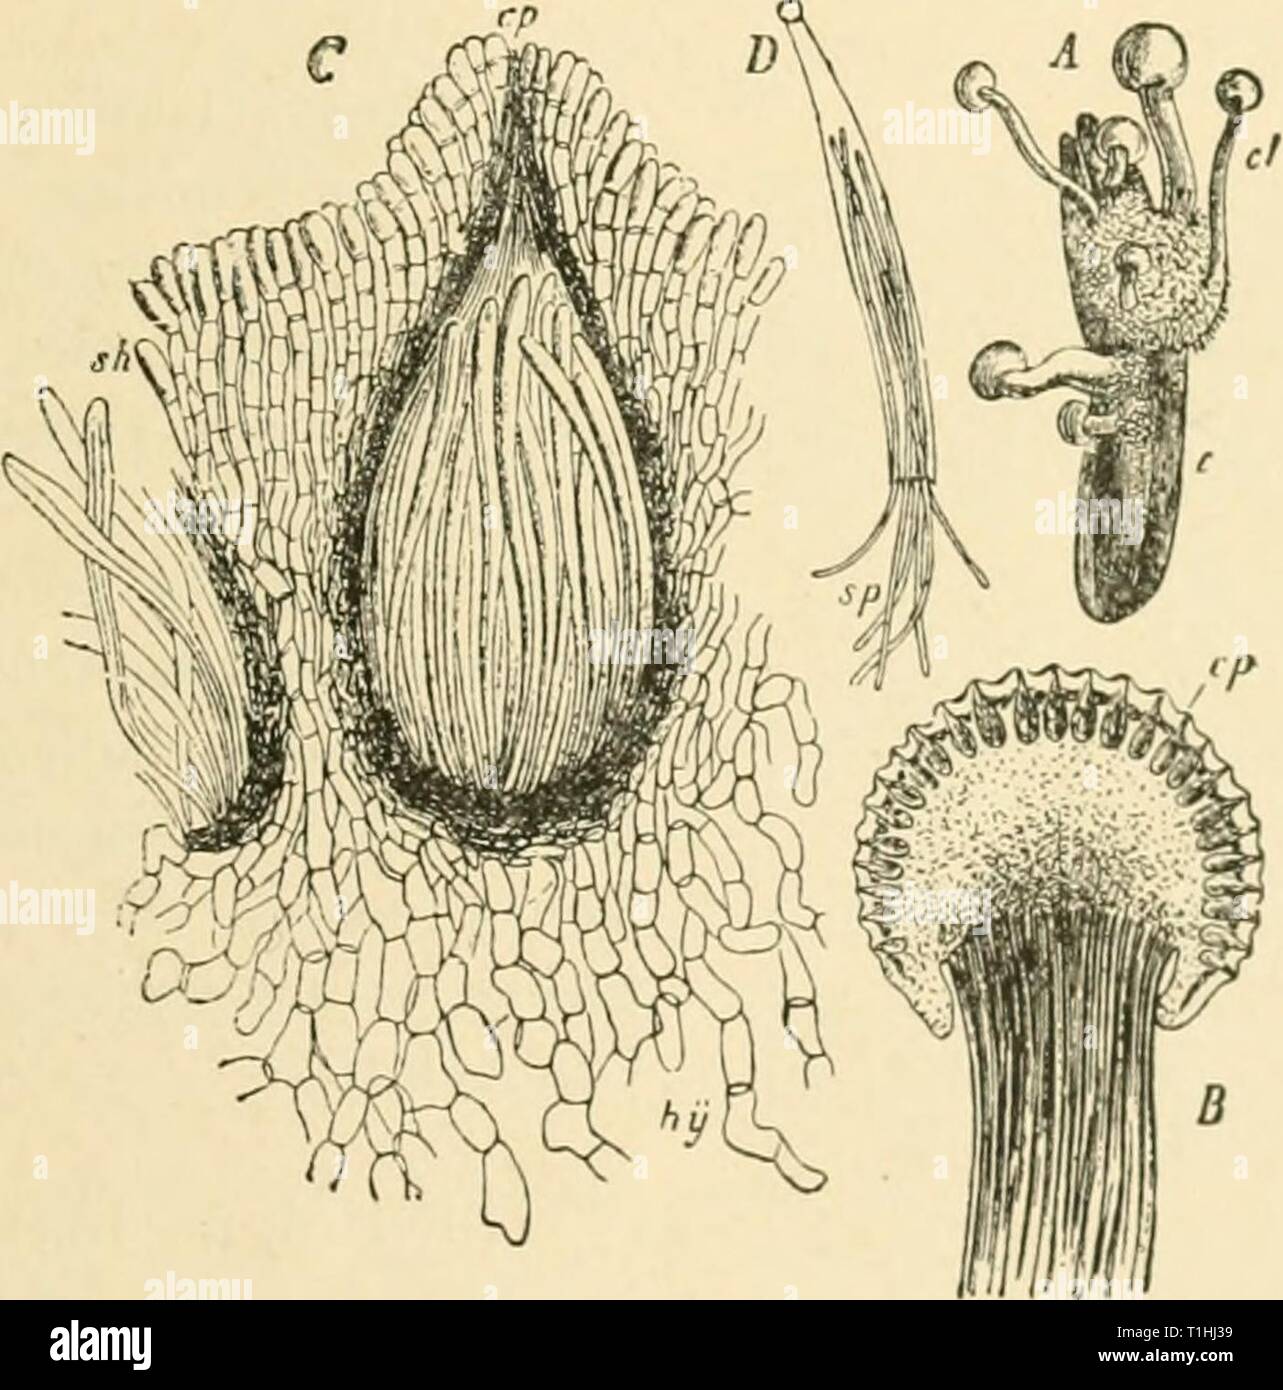 Diseases of plants induced by Diseases of plants induced by cryptogamic parasites; introduction to the study of pathogenic Fungi, slime-Fungi, bacteria, & Algae  diseasesofplants00tube Year: 1897  CLAVICEPS. 193 conidiophores. A very sweet tluid, the so-called 'honey-dew,' is separated from the sphacelia; this attracts insects, which carry the conidia to other flowers. Since the conidia are capable of immediate germination, and give rise to a mycelium which penetrates through the outer coat of the ovary, the disease can be quickly disseminated during the flowering season of the grasses. After  Stock Photo